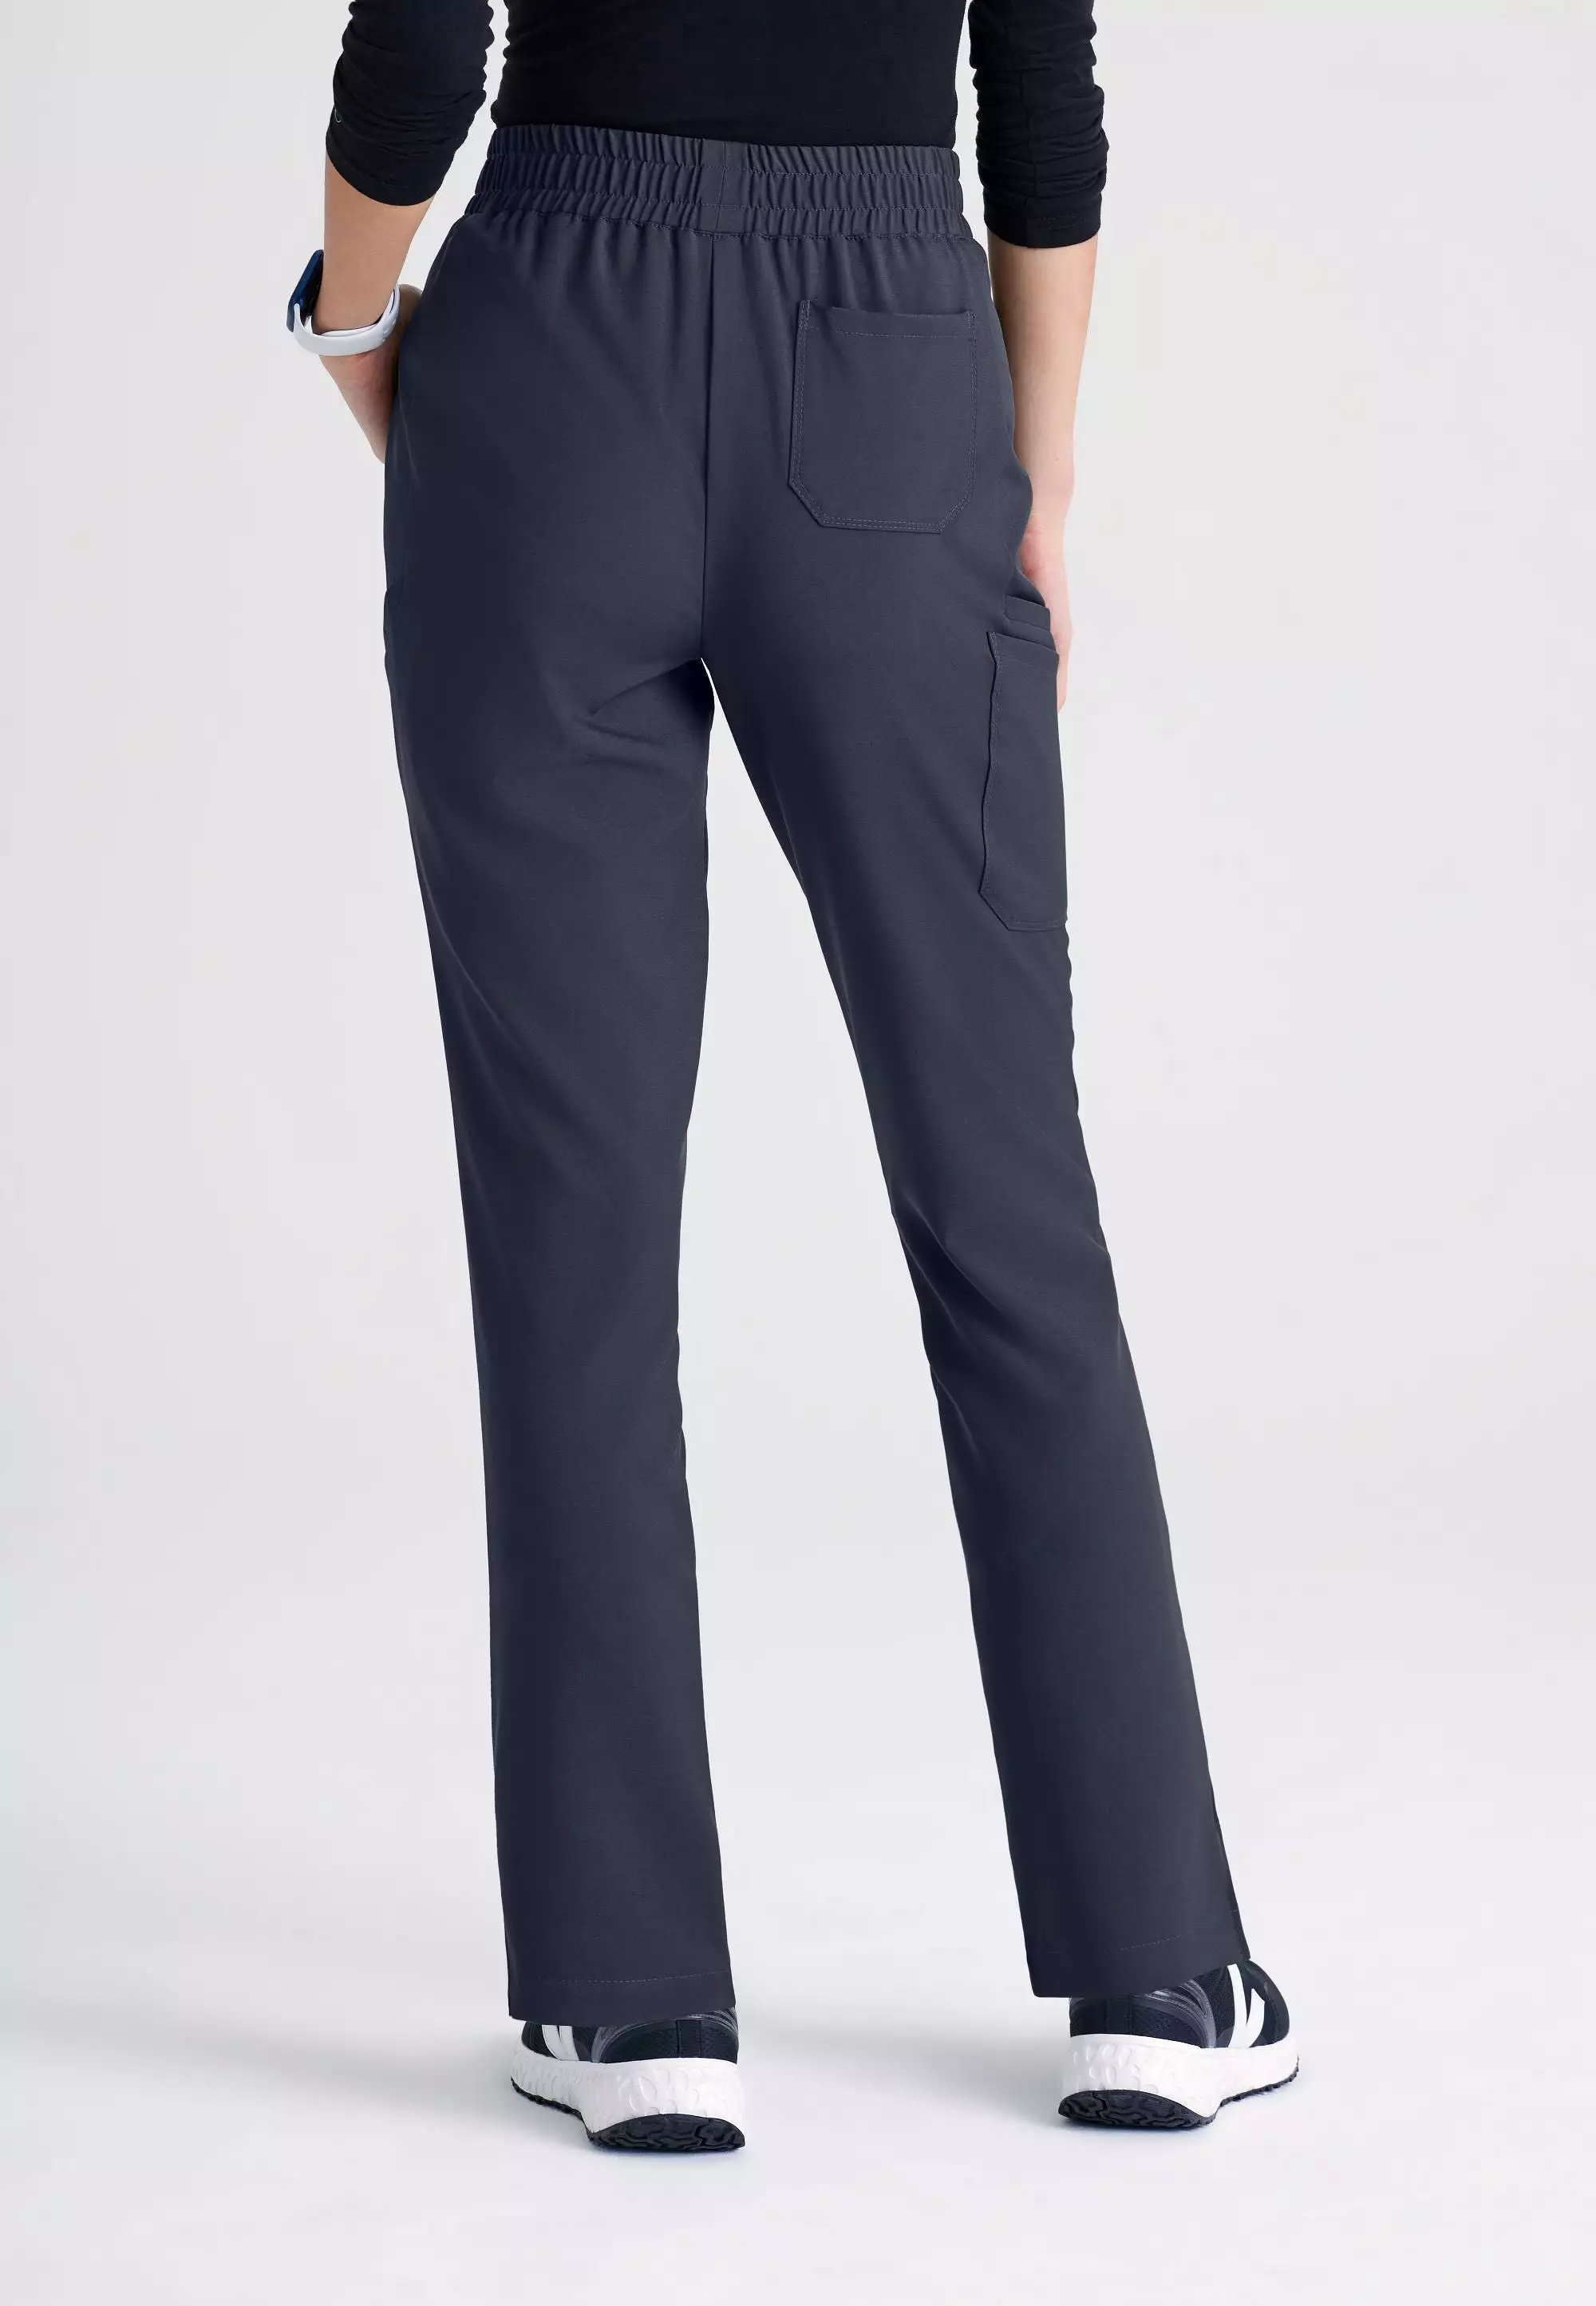 Barco Grey's Anatomy Evolve GSSP627 Cosmo 6 Pocket Tapered Pant - PETITE